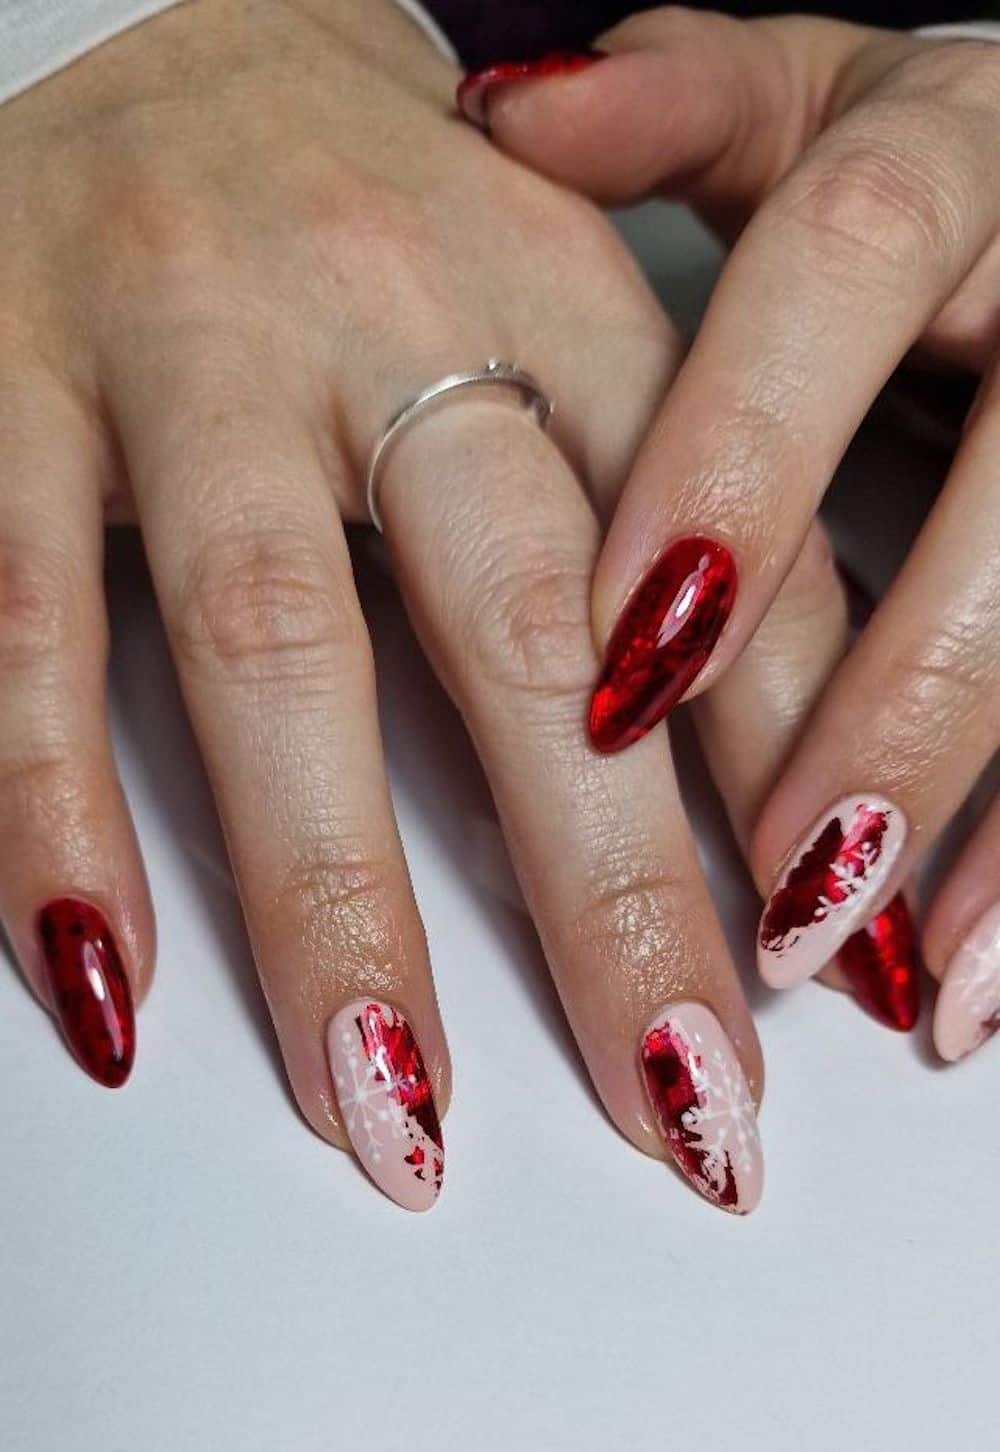 Red foil manicure with white snowflake details.